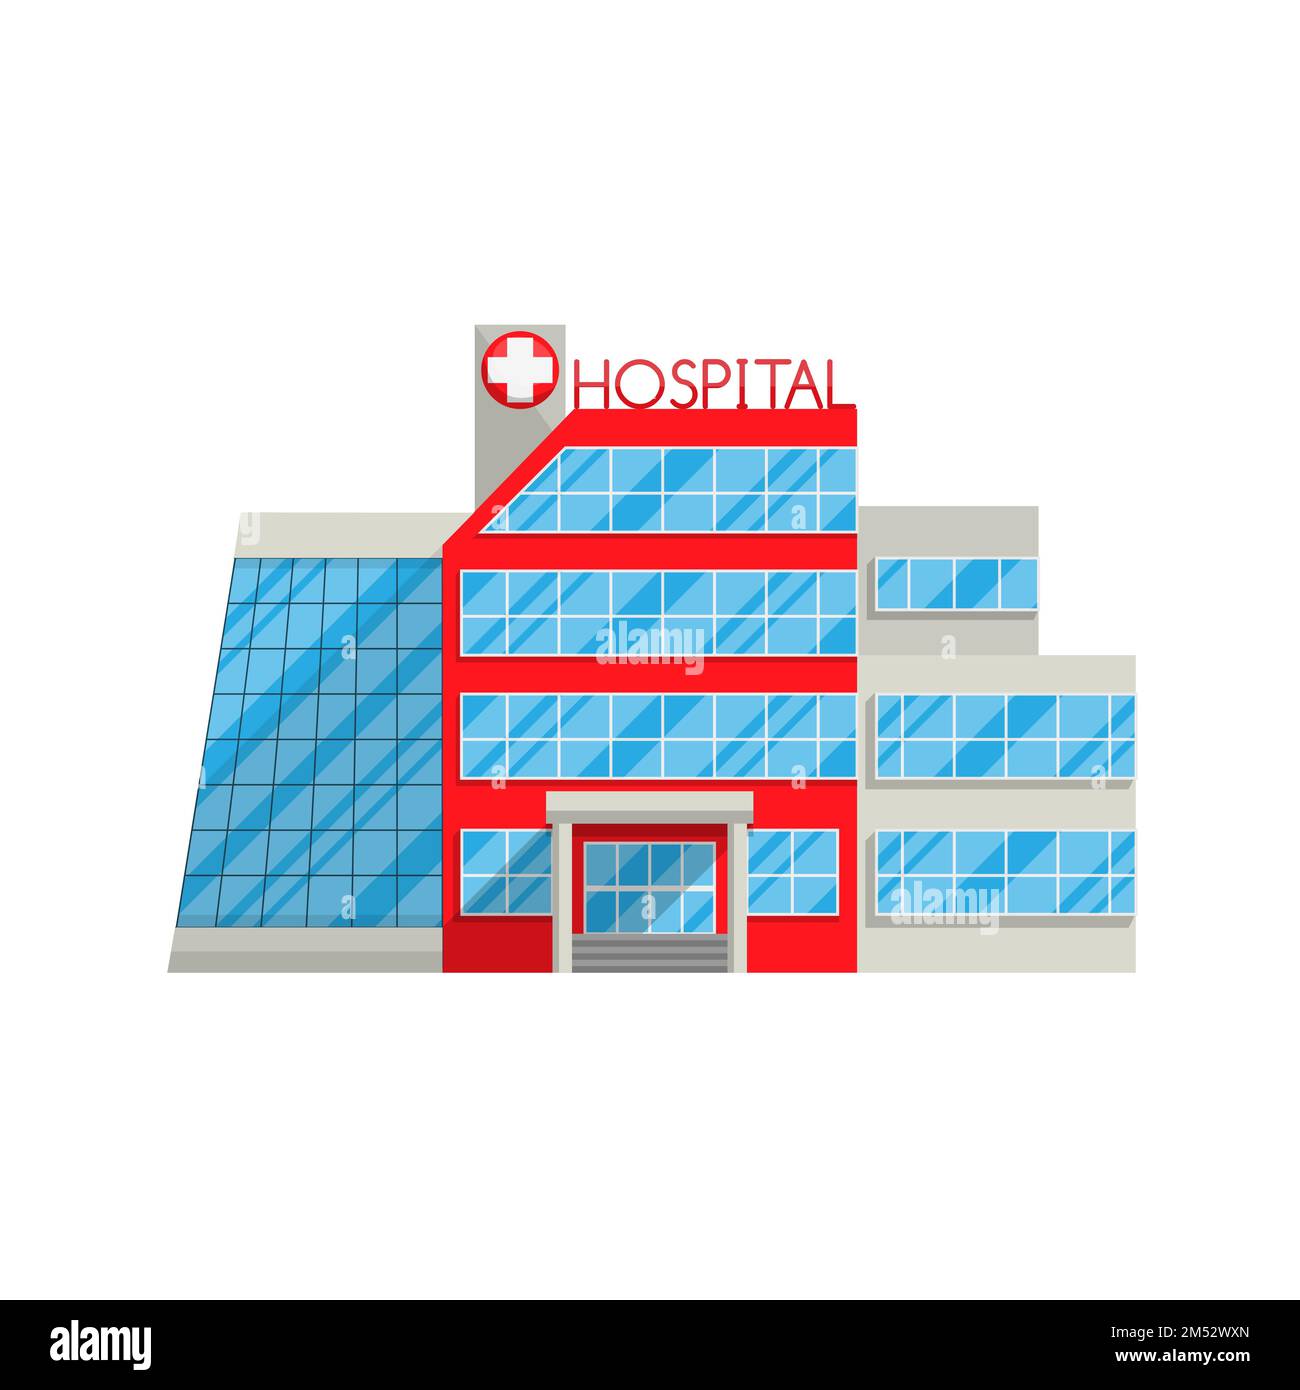 Hospital in flat style isolated on white background Vector illustration. Medical health protection treatment of diseases, injuries, hospitalization se Stock Vector